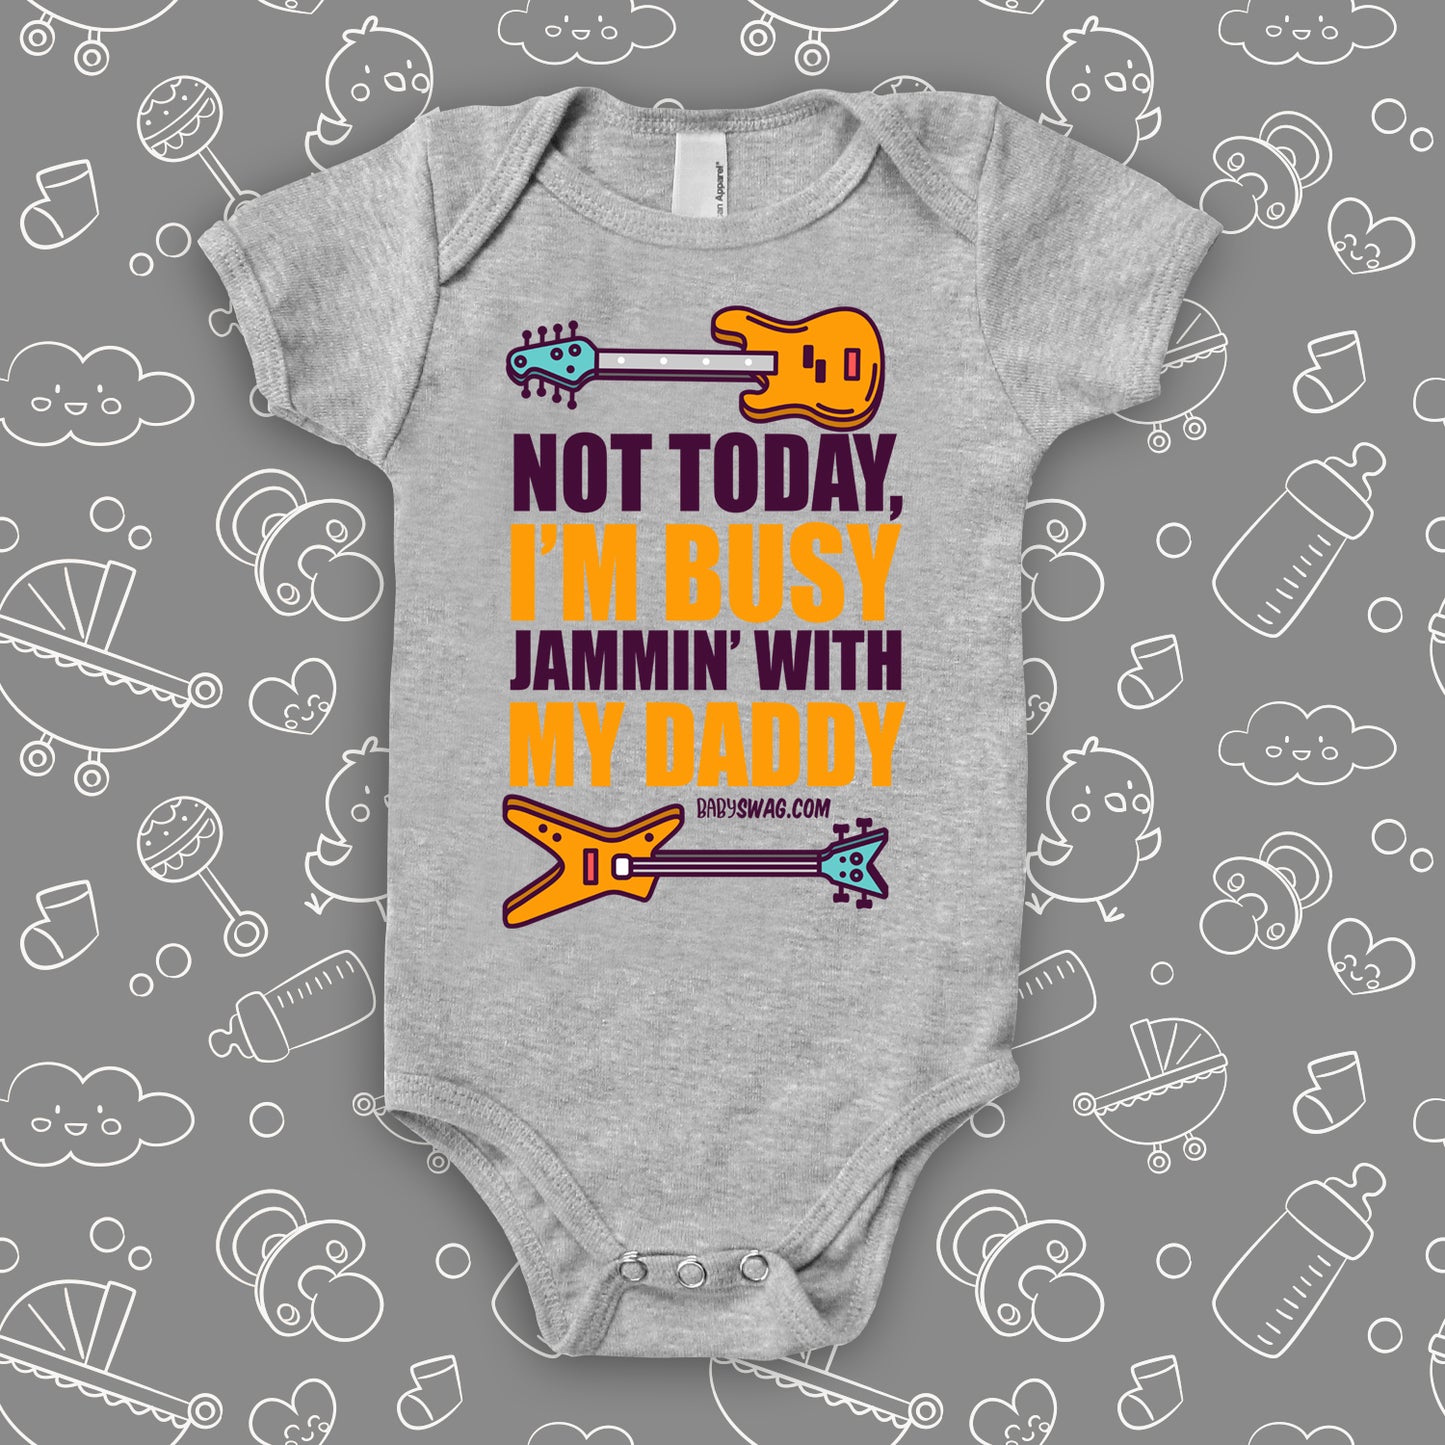 Rock n' roll onesies with saying "Not Today. I'm Busy Jammin' With My Dad" in grey. 